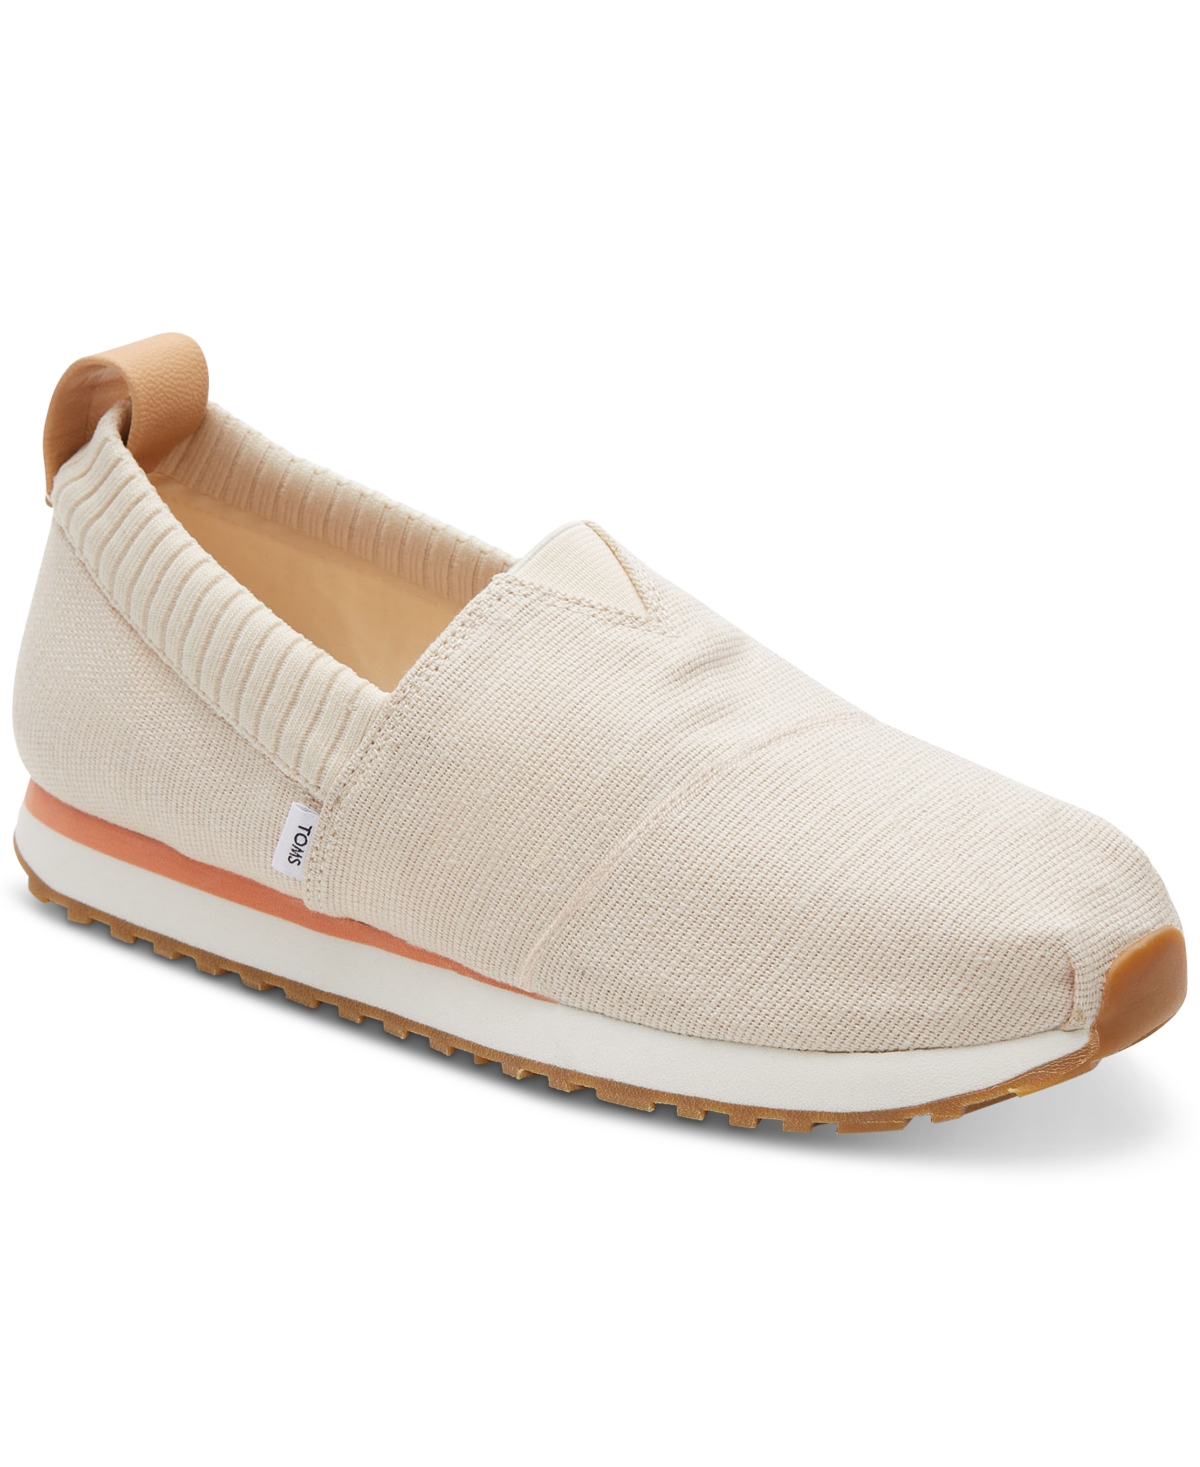 TOMS WOMEN'S ALPARGATA RESIDENT SLIP-ON RECYCLED TRAINER SNEAKERS WOMEN'S SHOES